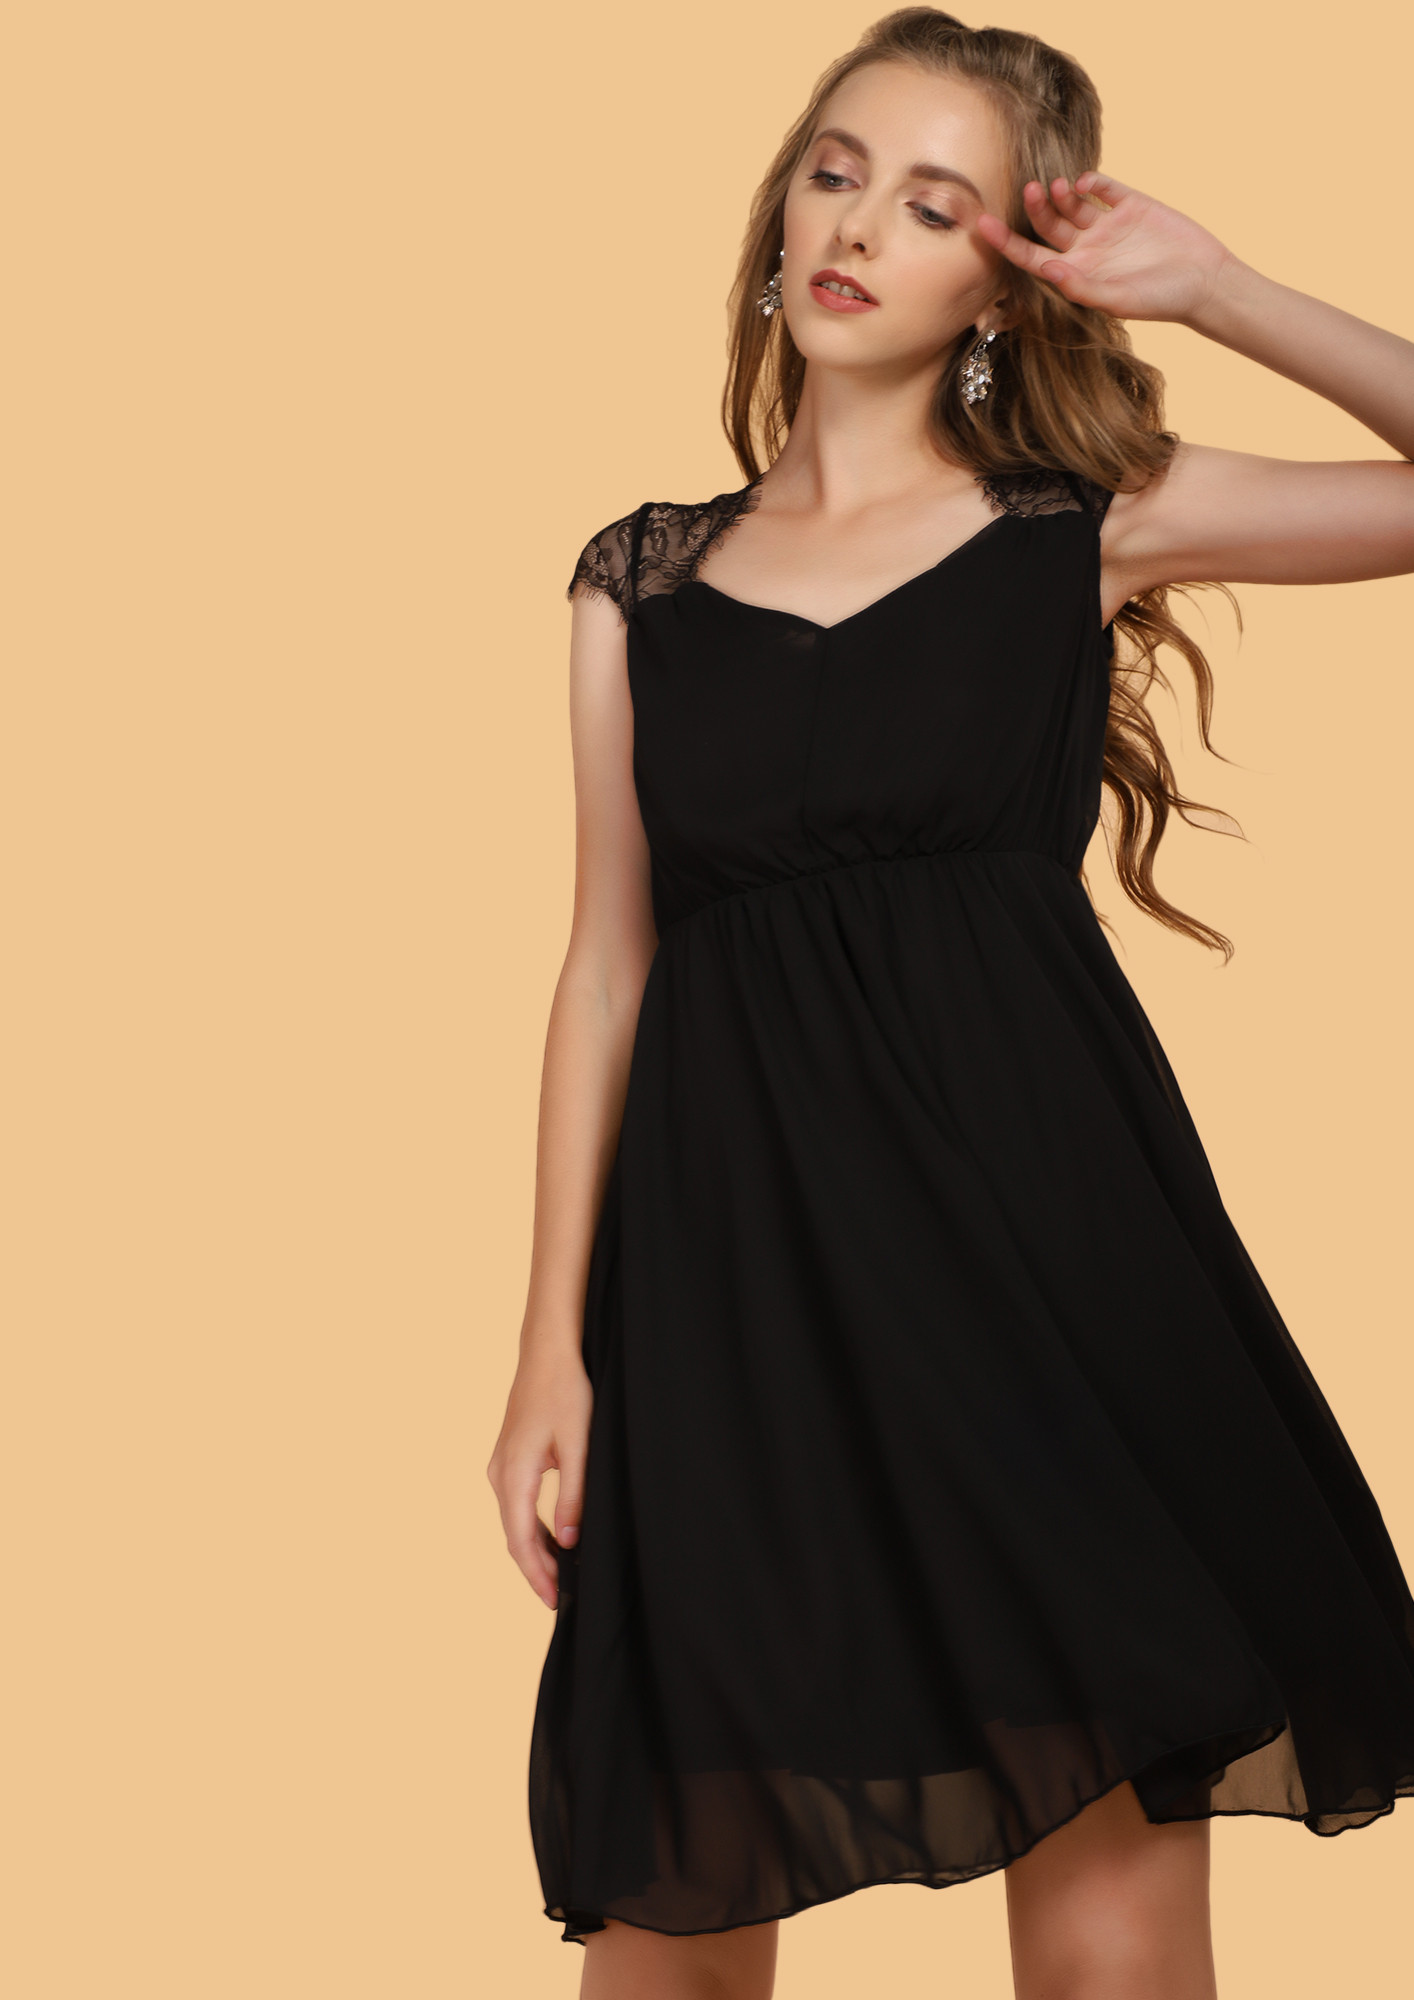 PERFECTLY MESHED BLACK SKATER DRESS